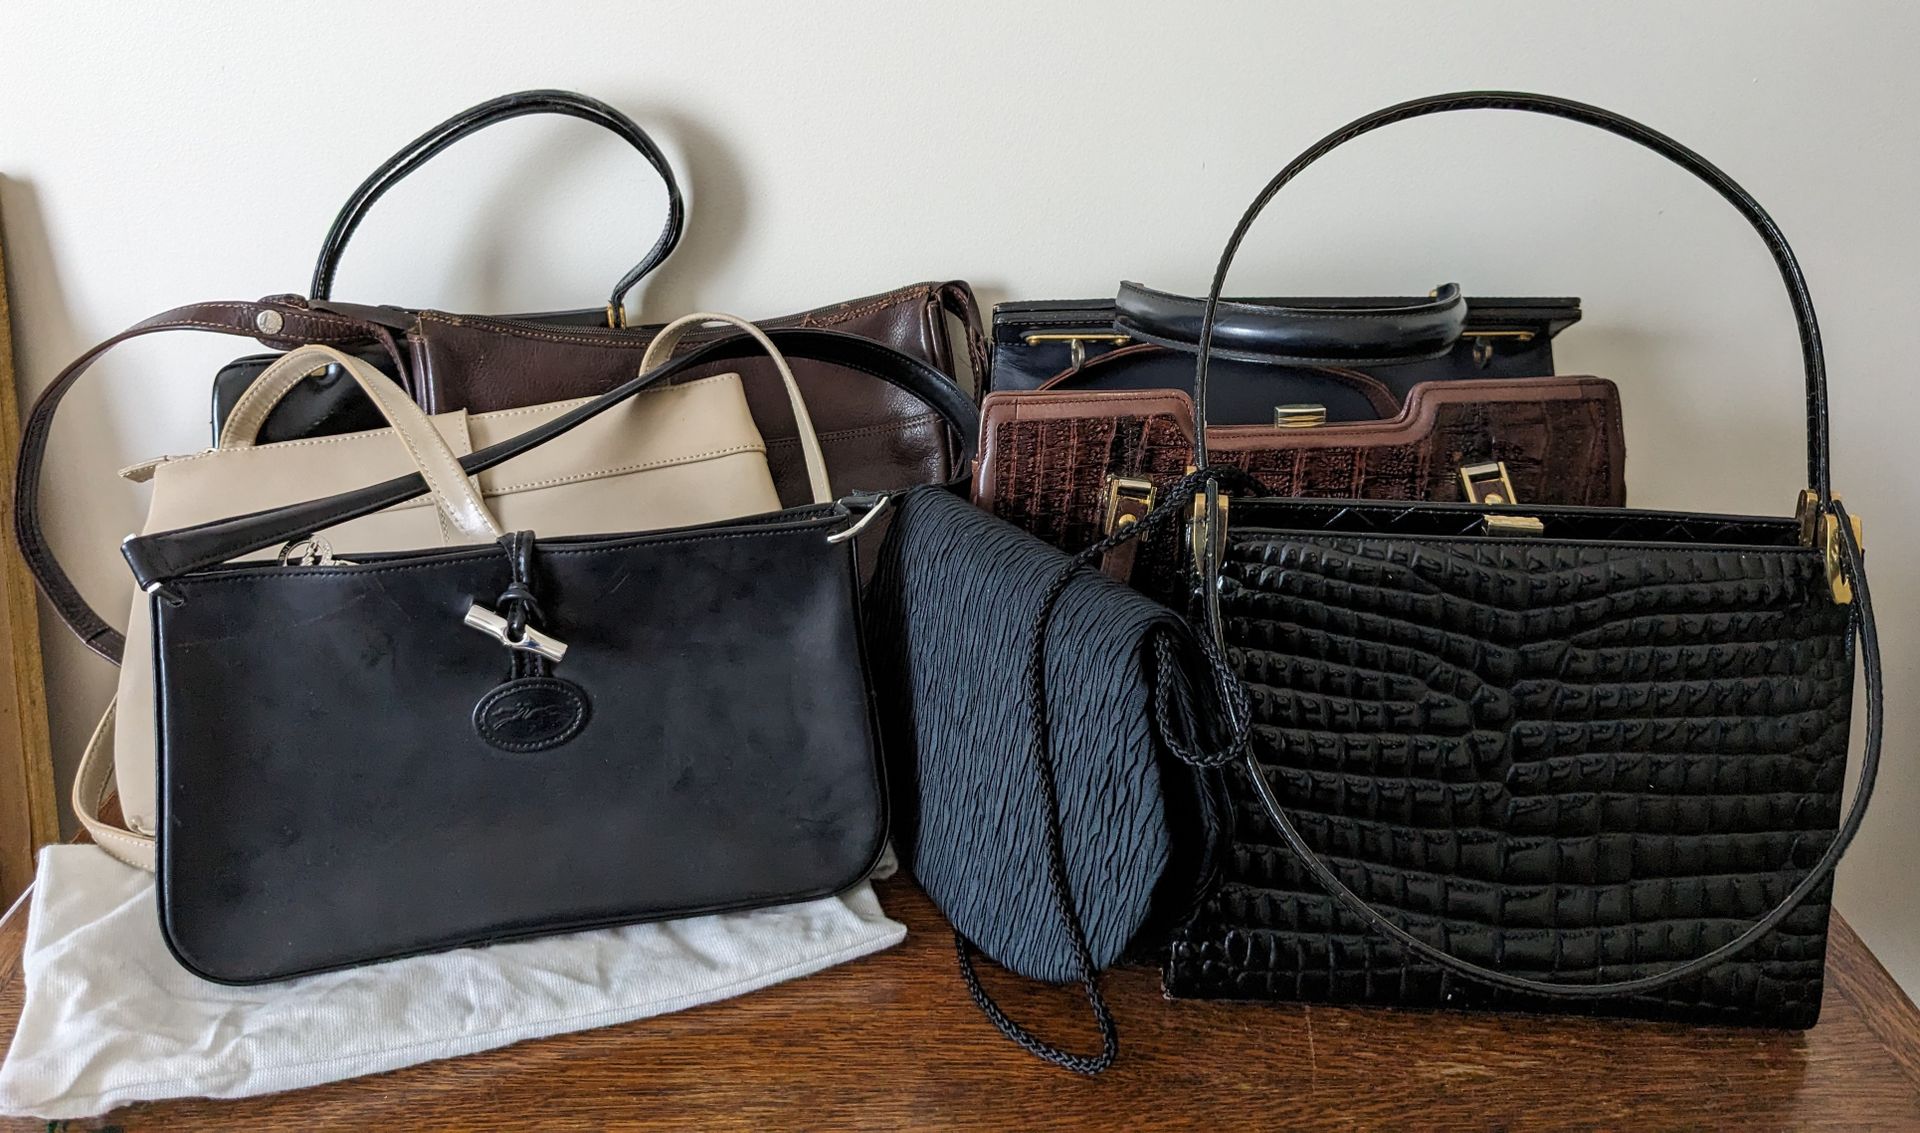 Null Set of leather handbags, one Longchamp, one Pourchet. As is.